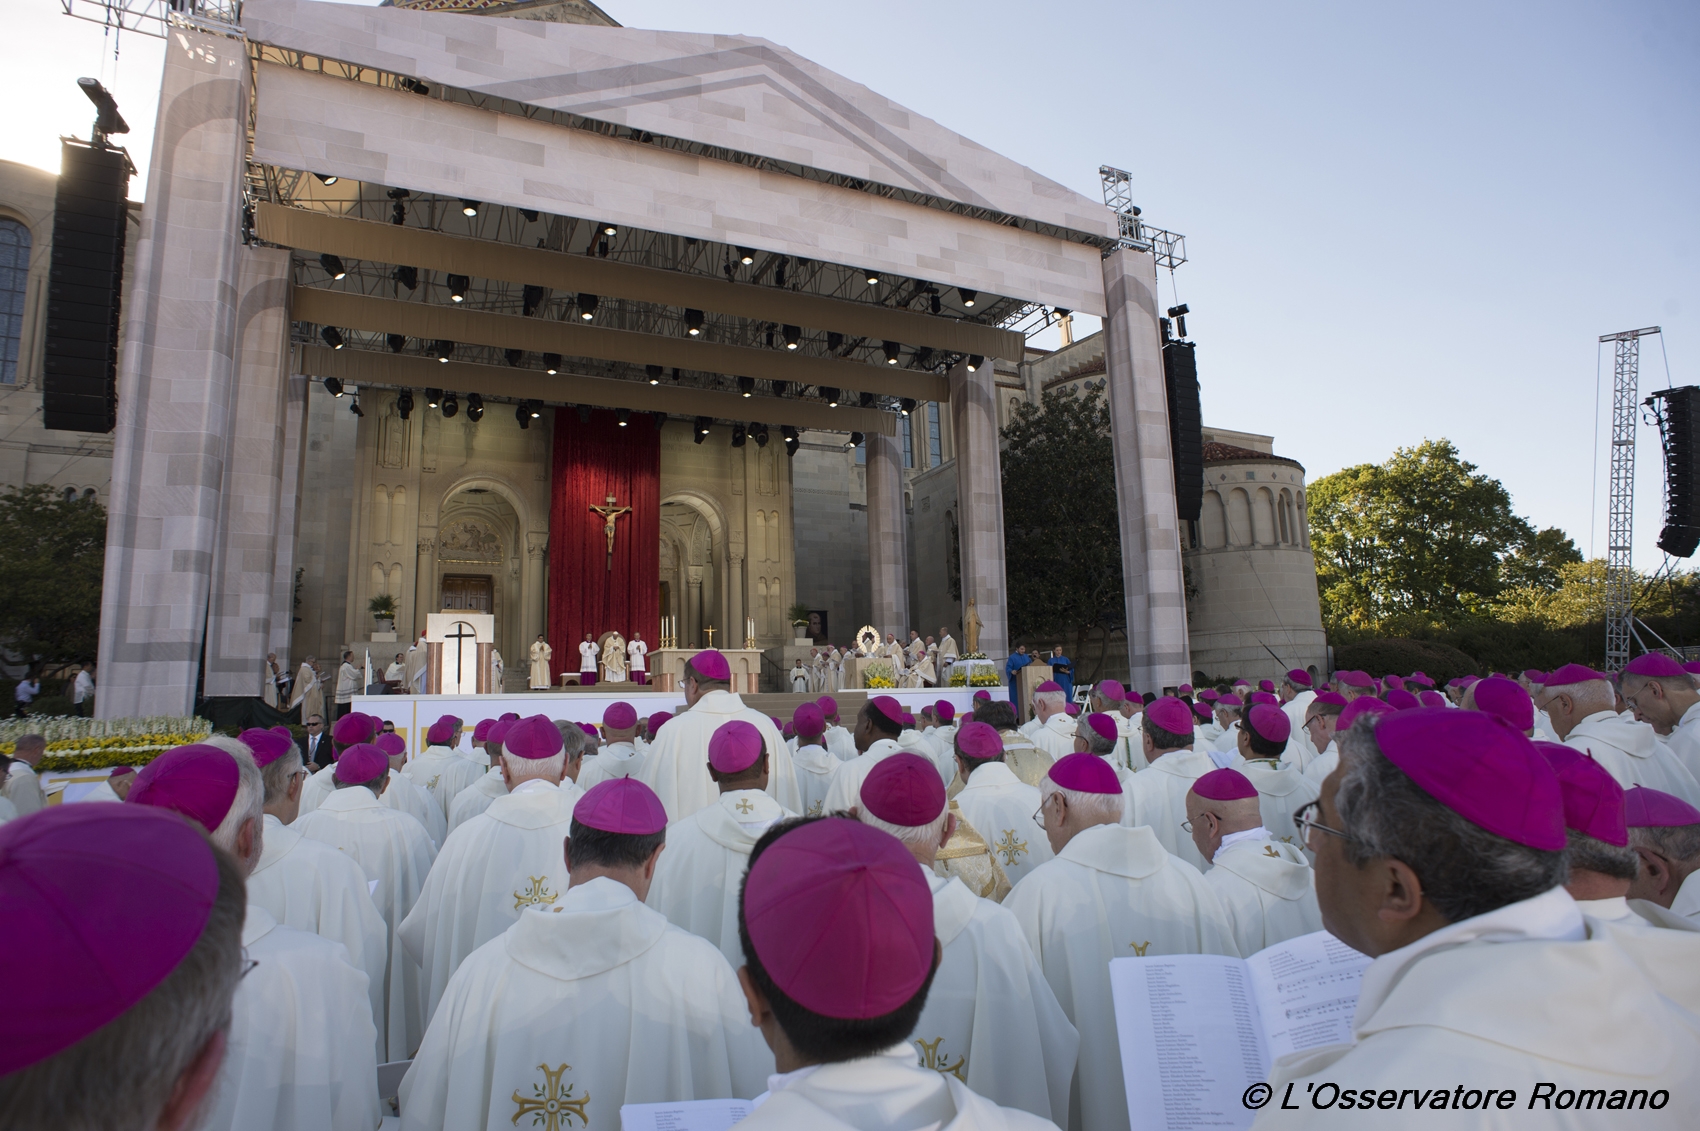 Canonization Mass for Friar Junipero Serra at the Basilica of the National Shrine of the Immaculate Conception